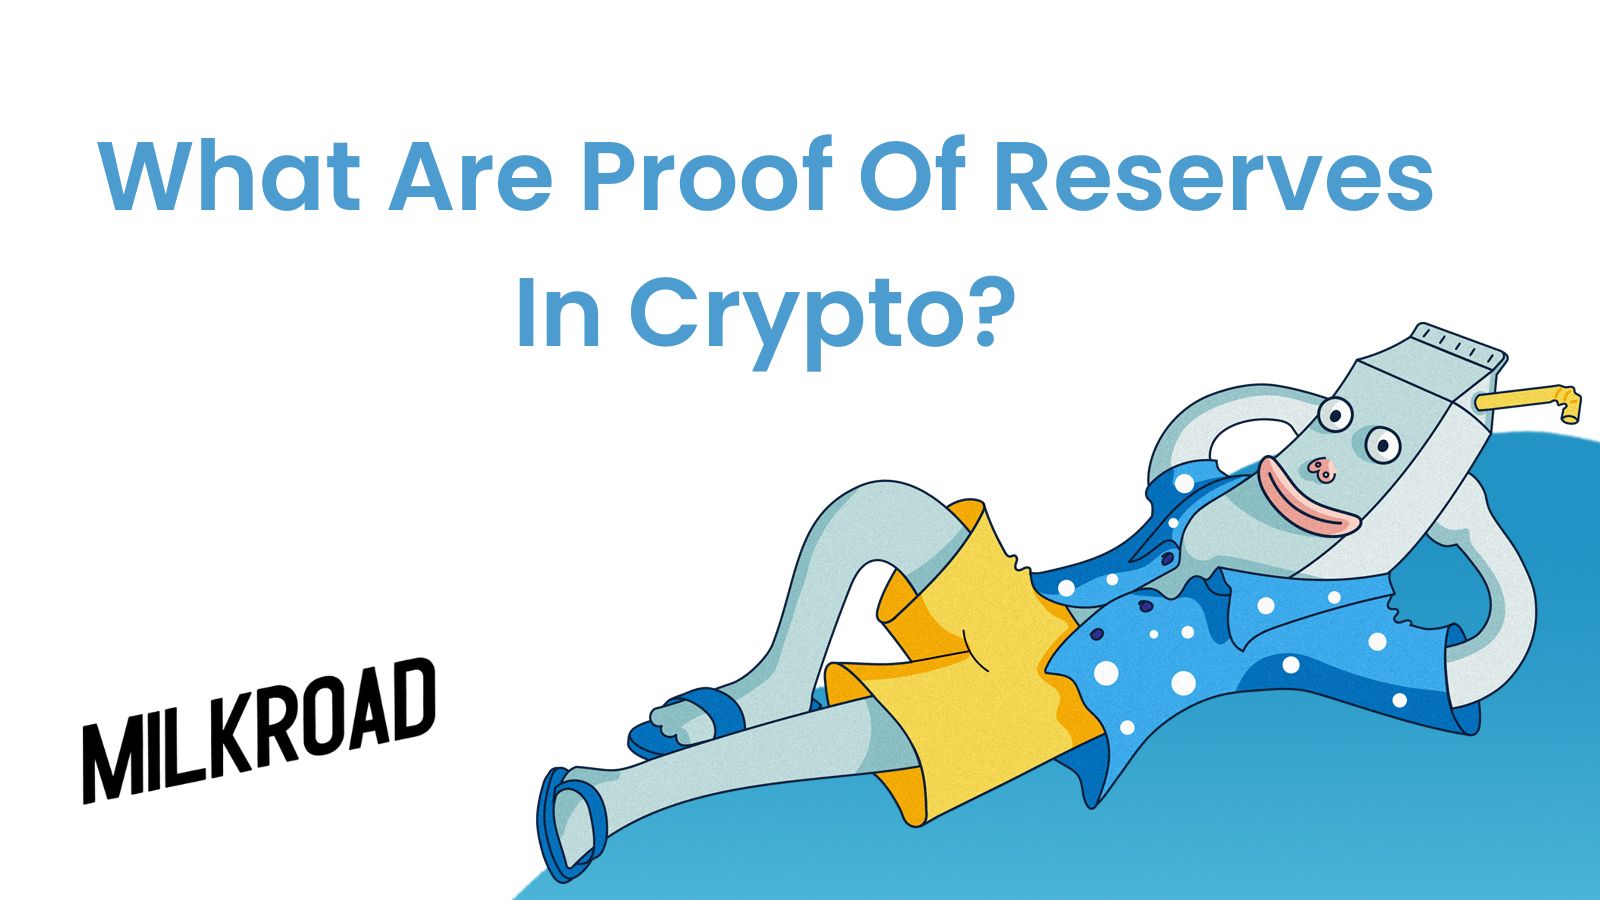 What are Proof of Reserves in Crypto